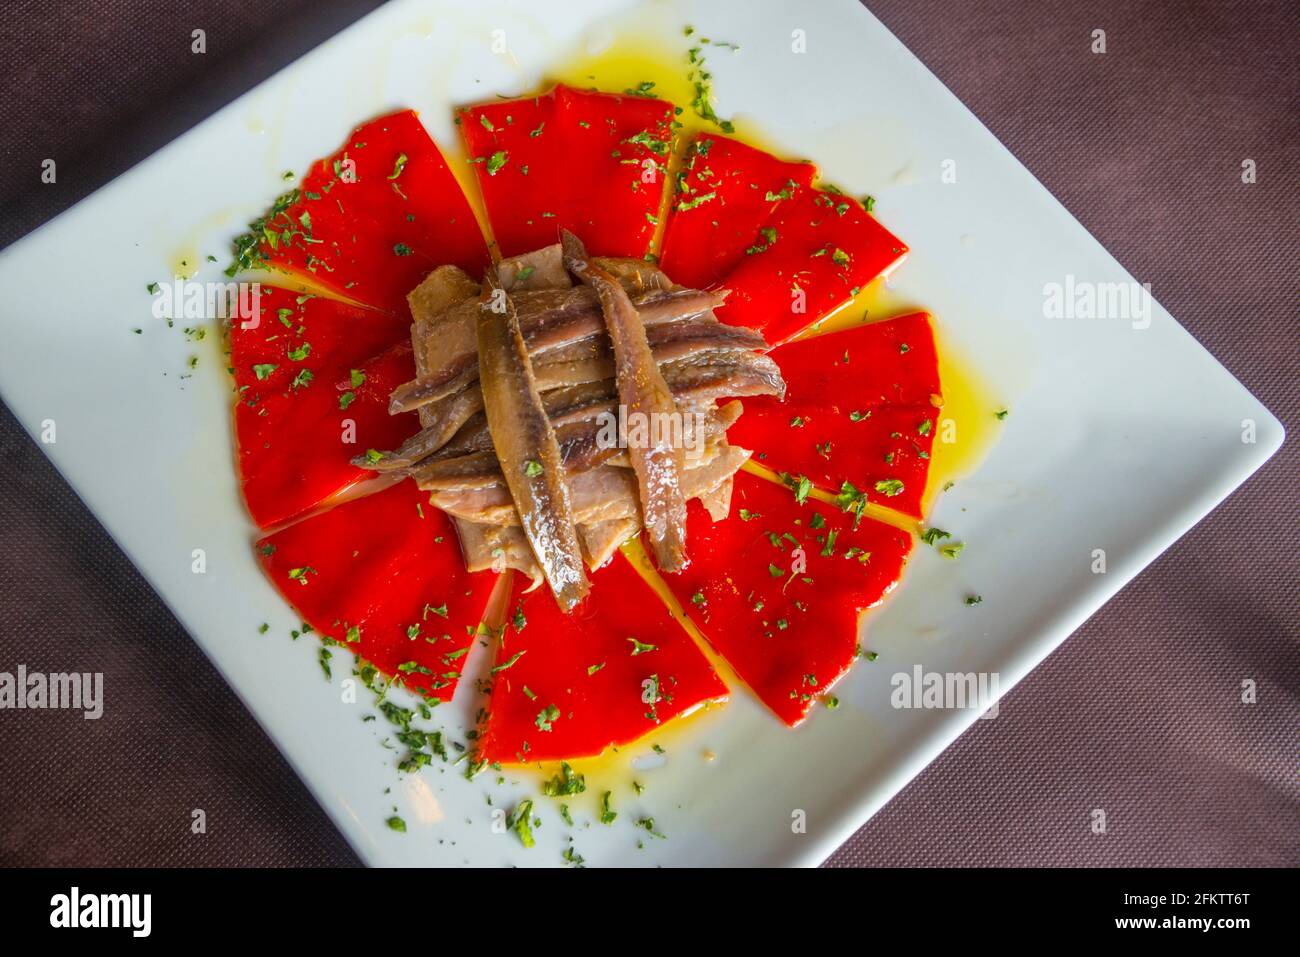 Salad made of Piquillo peppers, tuna loin, anchovy fillets, parsley and olive oil. Spain. Stock Photo